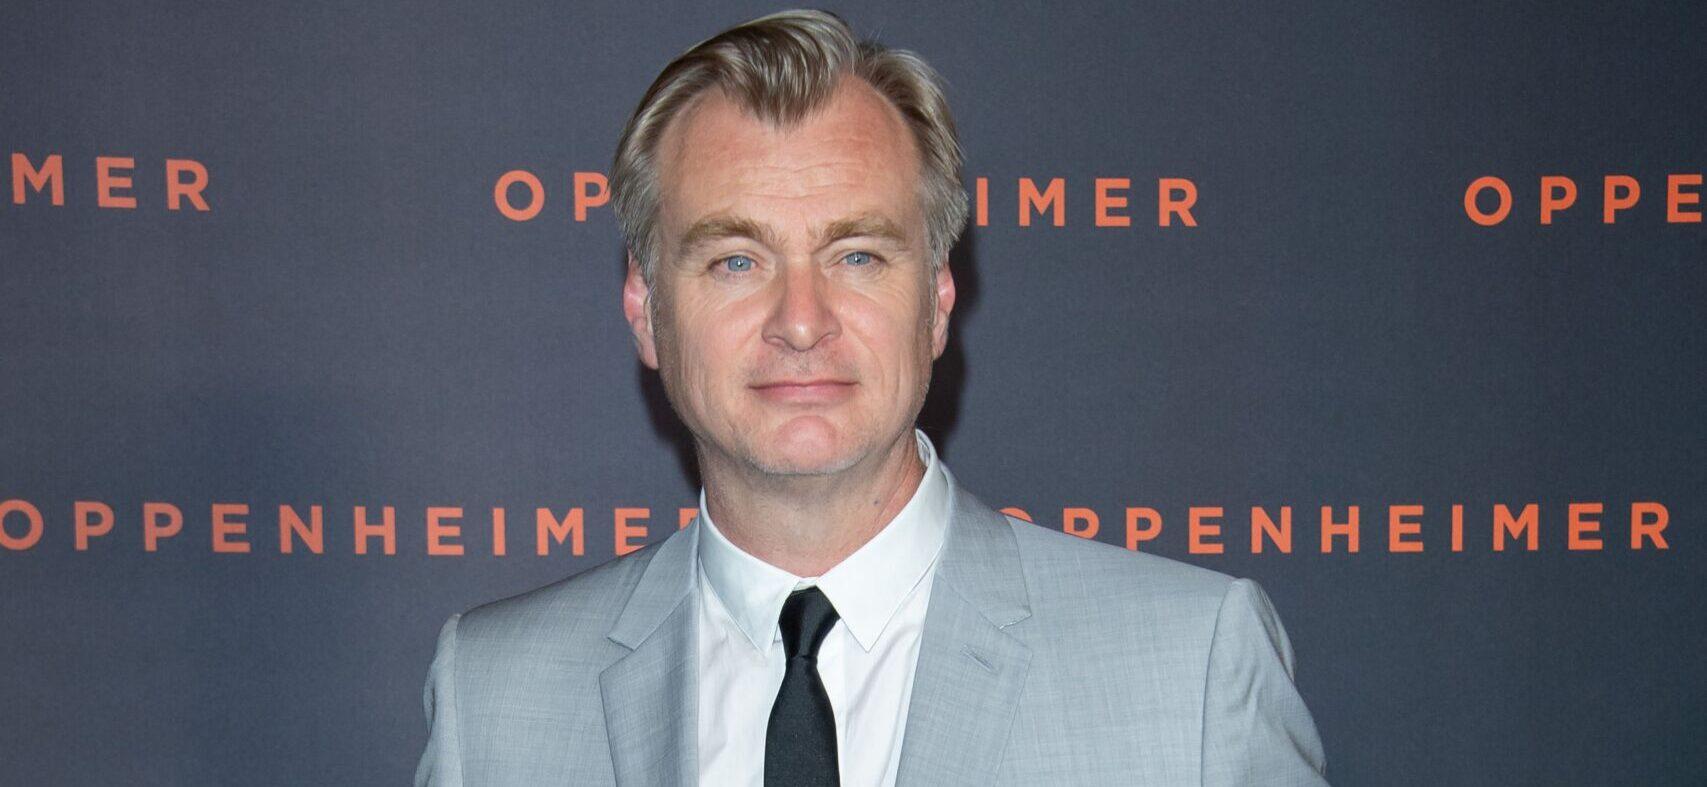 Christopher Nolan Reveals He Would Not Direct A Superhero Film Again After 'Dark Knight' Trilogy